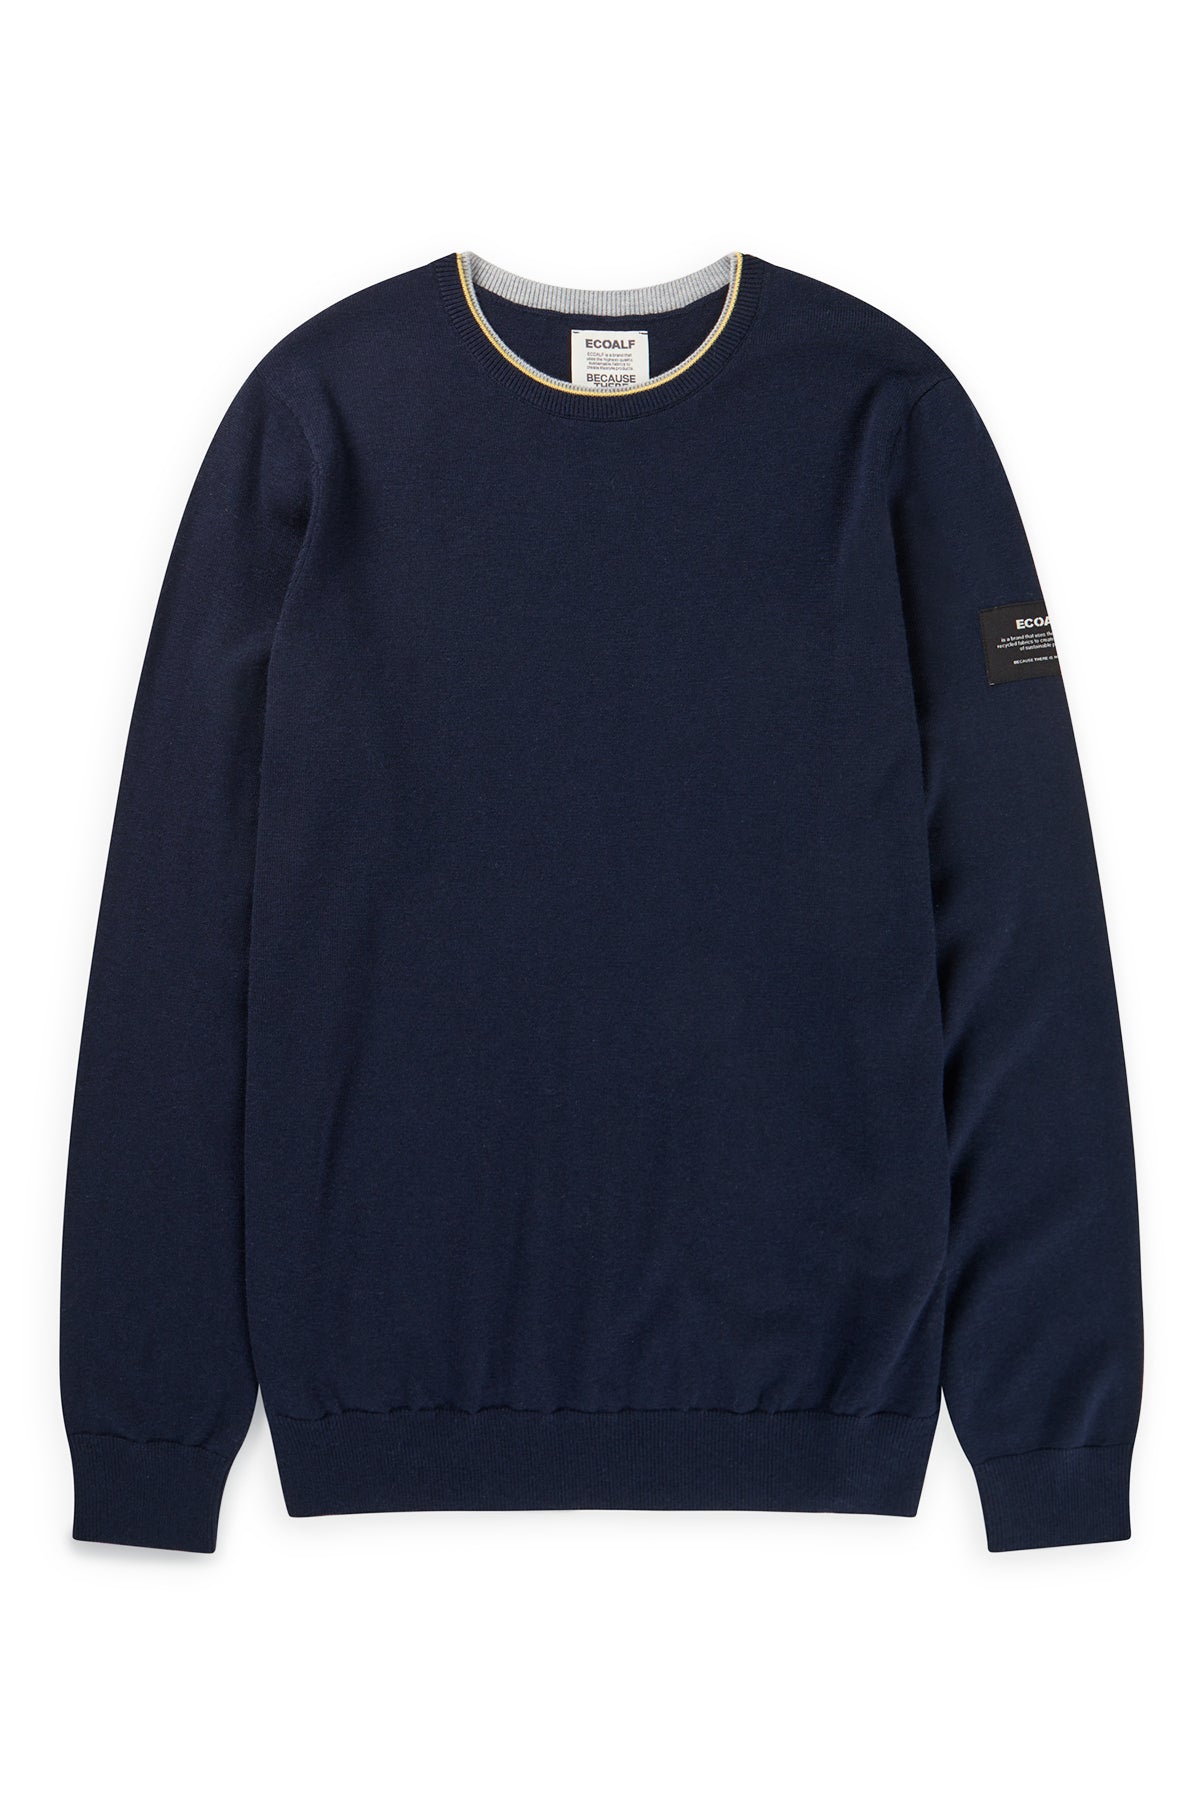 NAVY BLUE BLOCNE KNITTED SWEATER